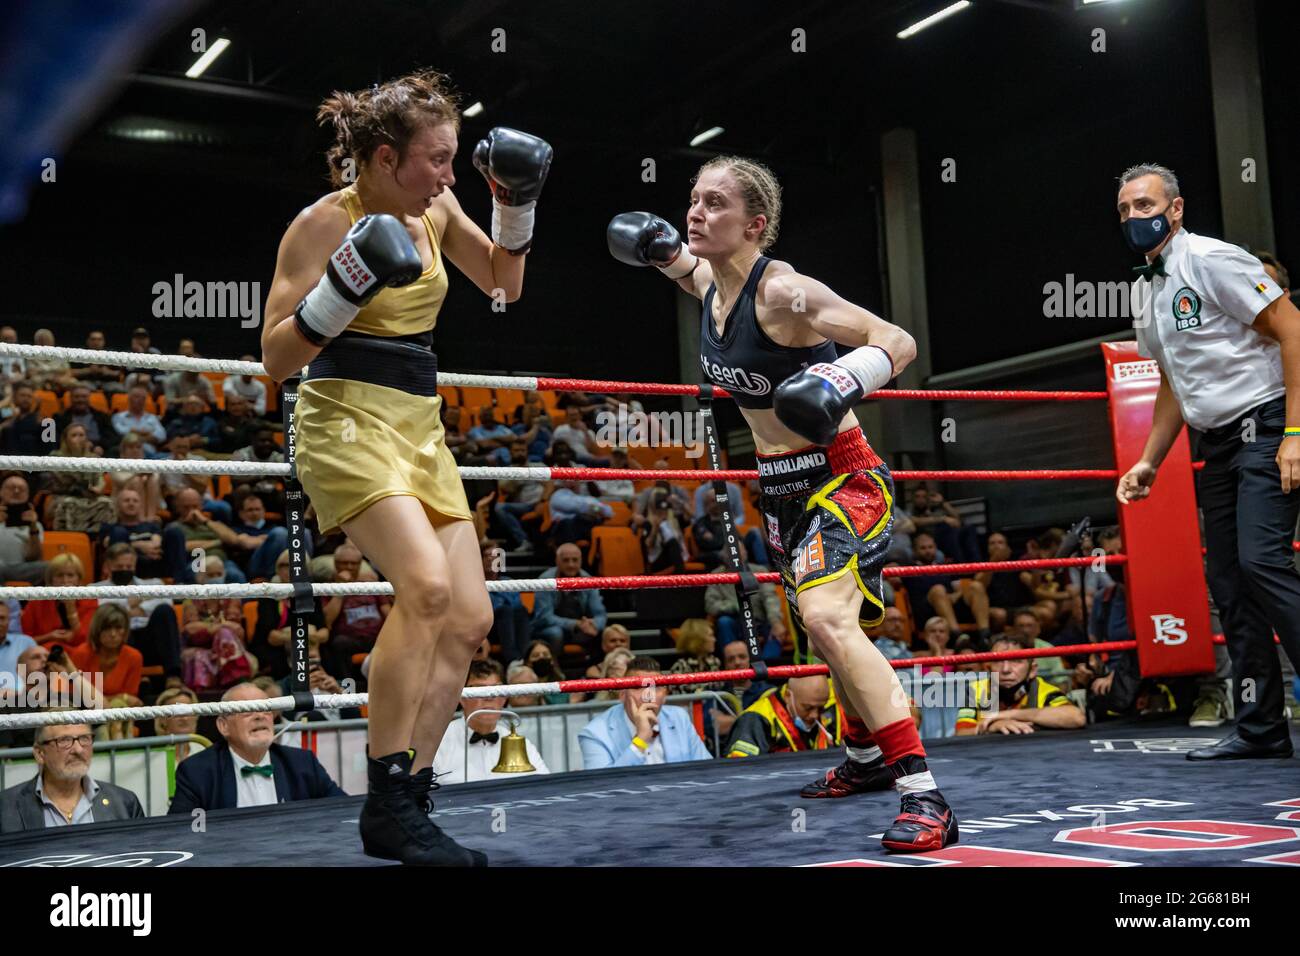 Belgian Delfine Persoon pictured in action during the fight between Belgian Delfine Persoon and Russian Elena Gradinar, for the International Boxing O Stock Photo